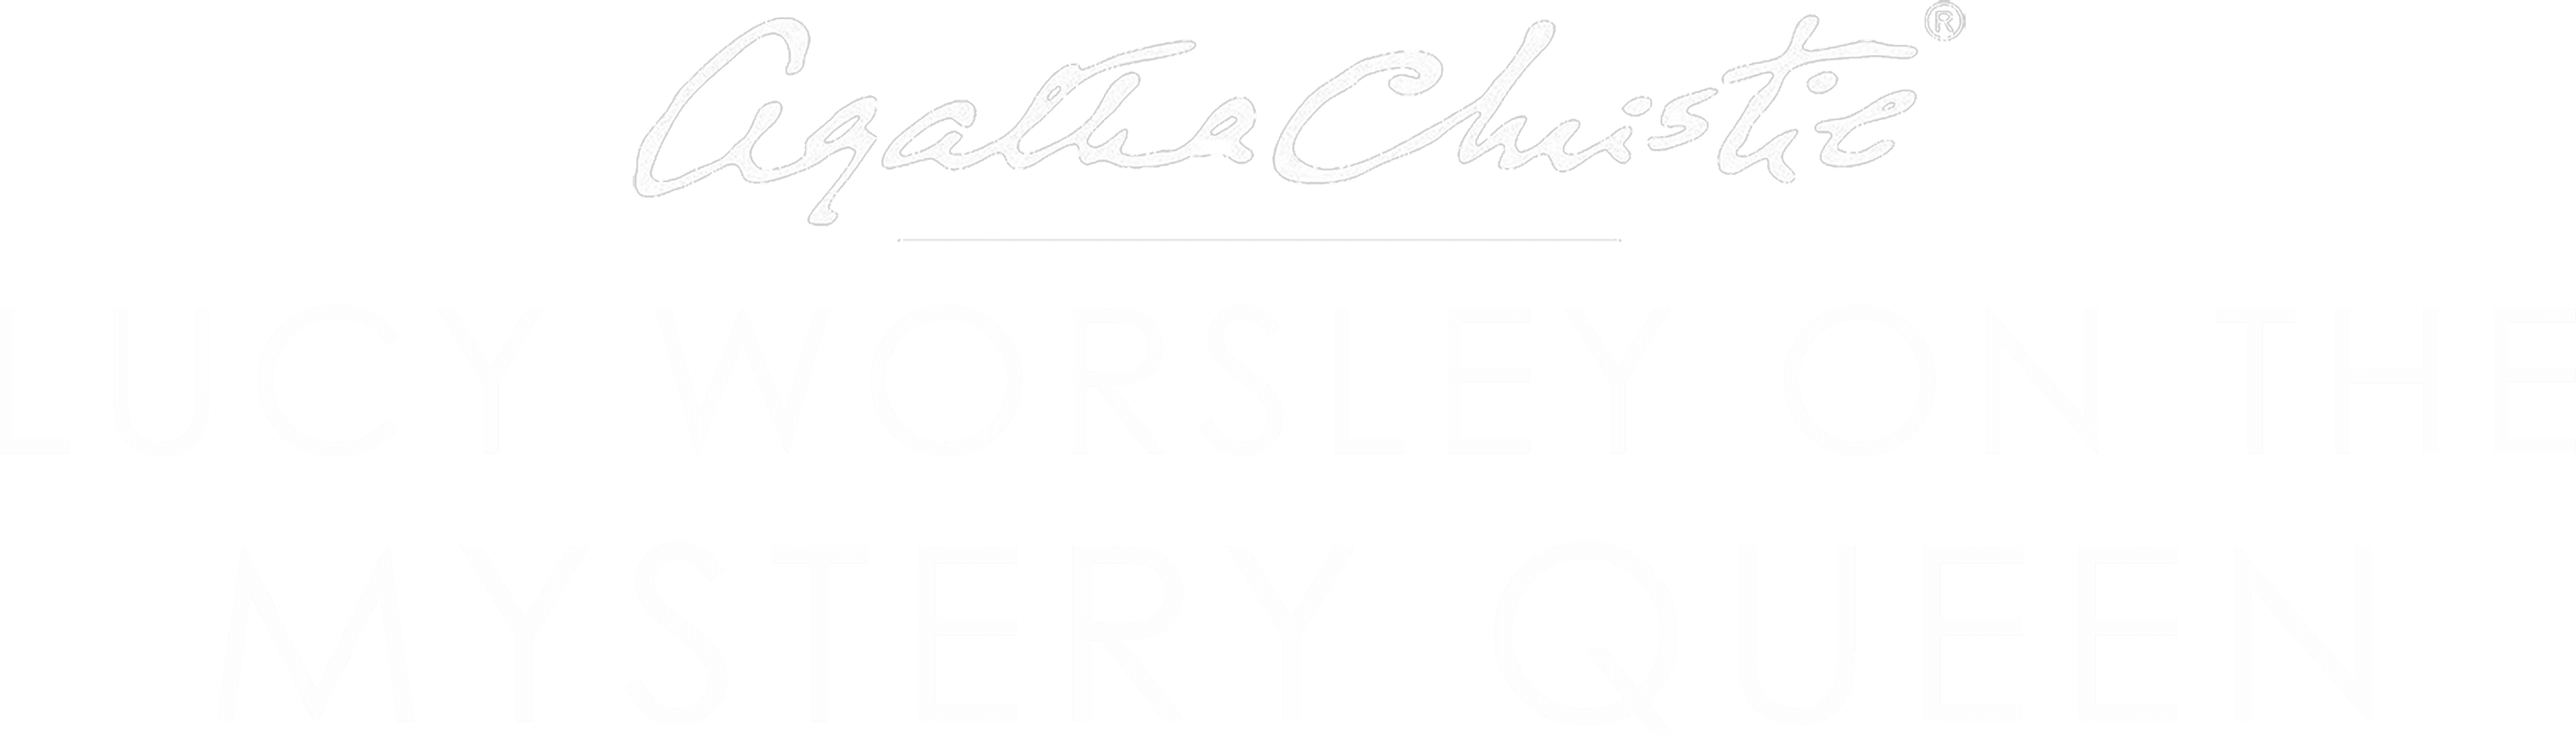 Agatha Christie: Lucy Worsley on the Mystery Queen logo